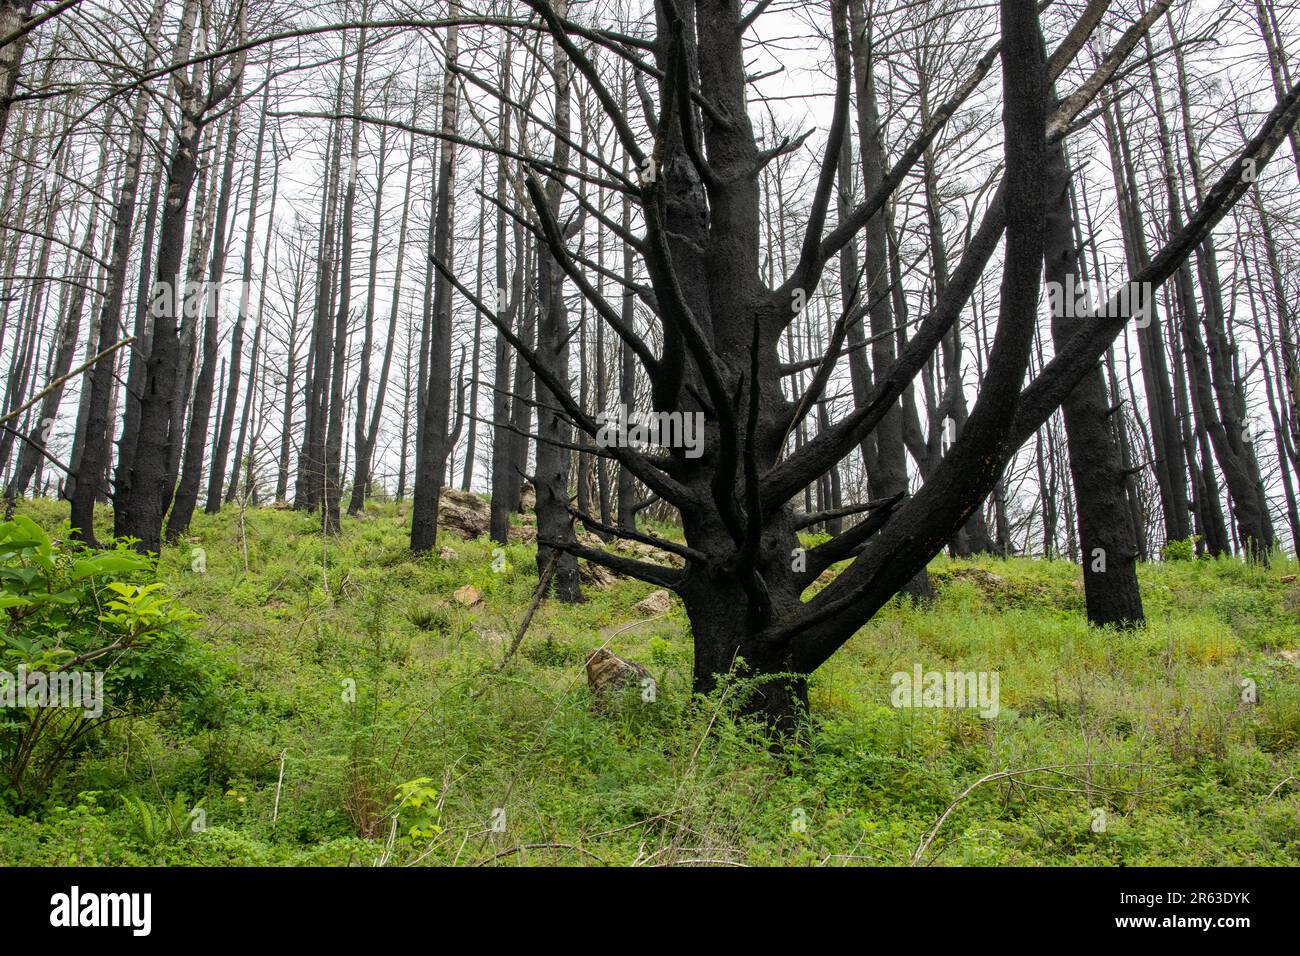 After the Woodward forest fire in California, many charred trees remain but the environment begins to heal as the understory grows. Stock Photo